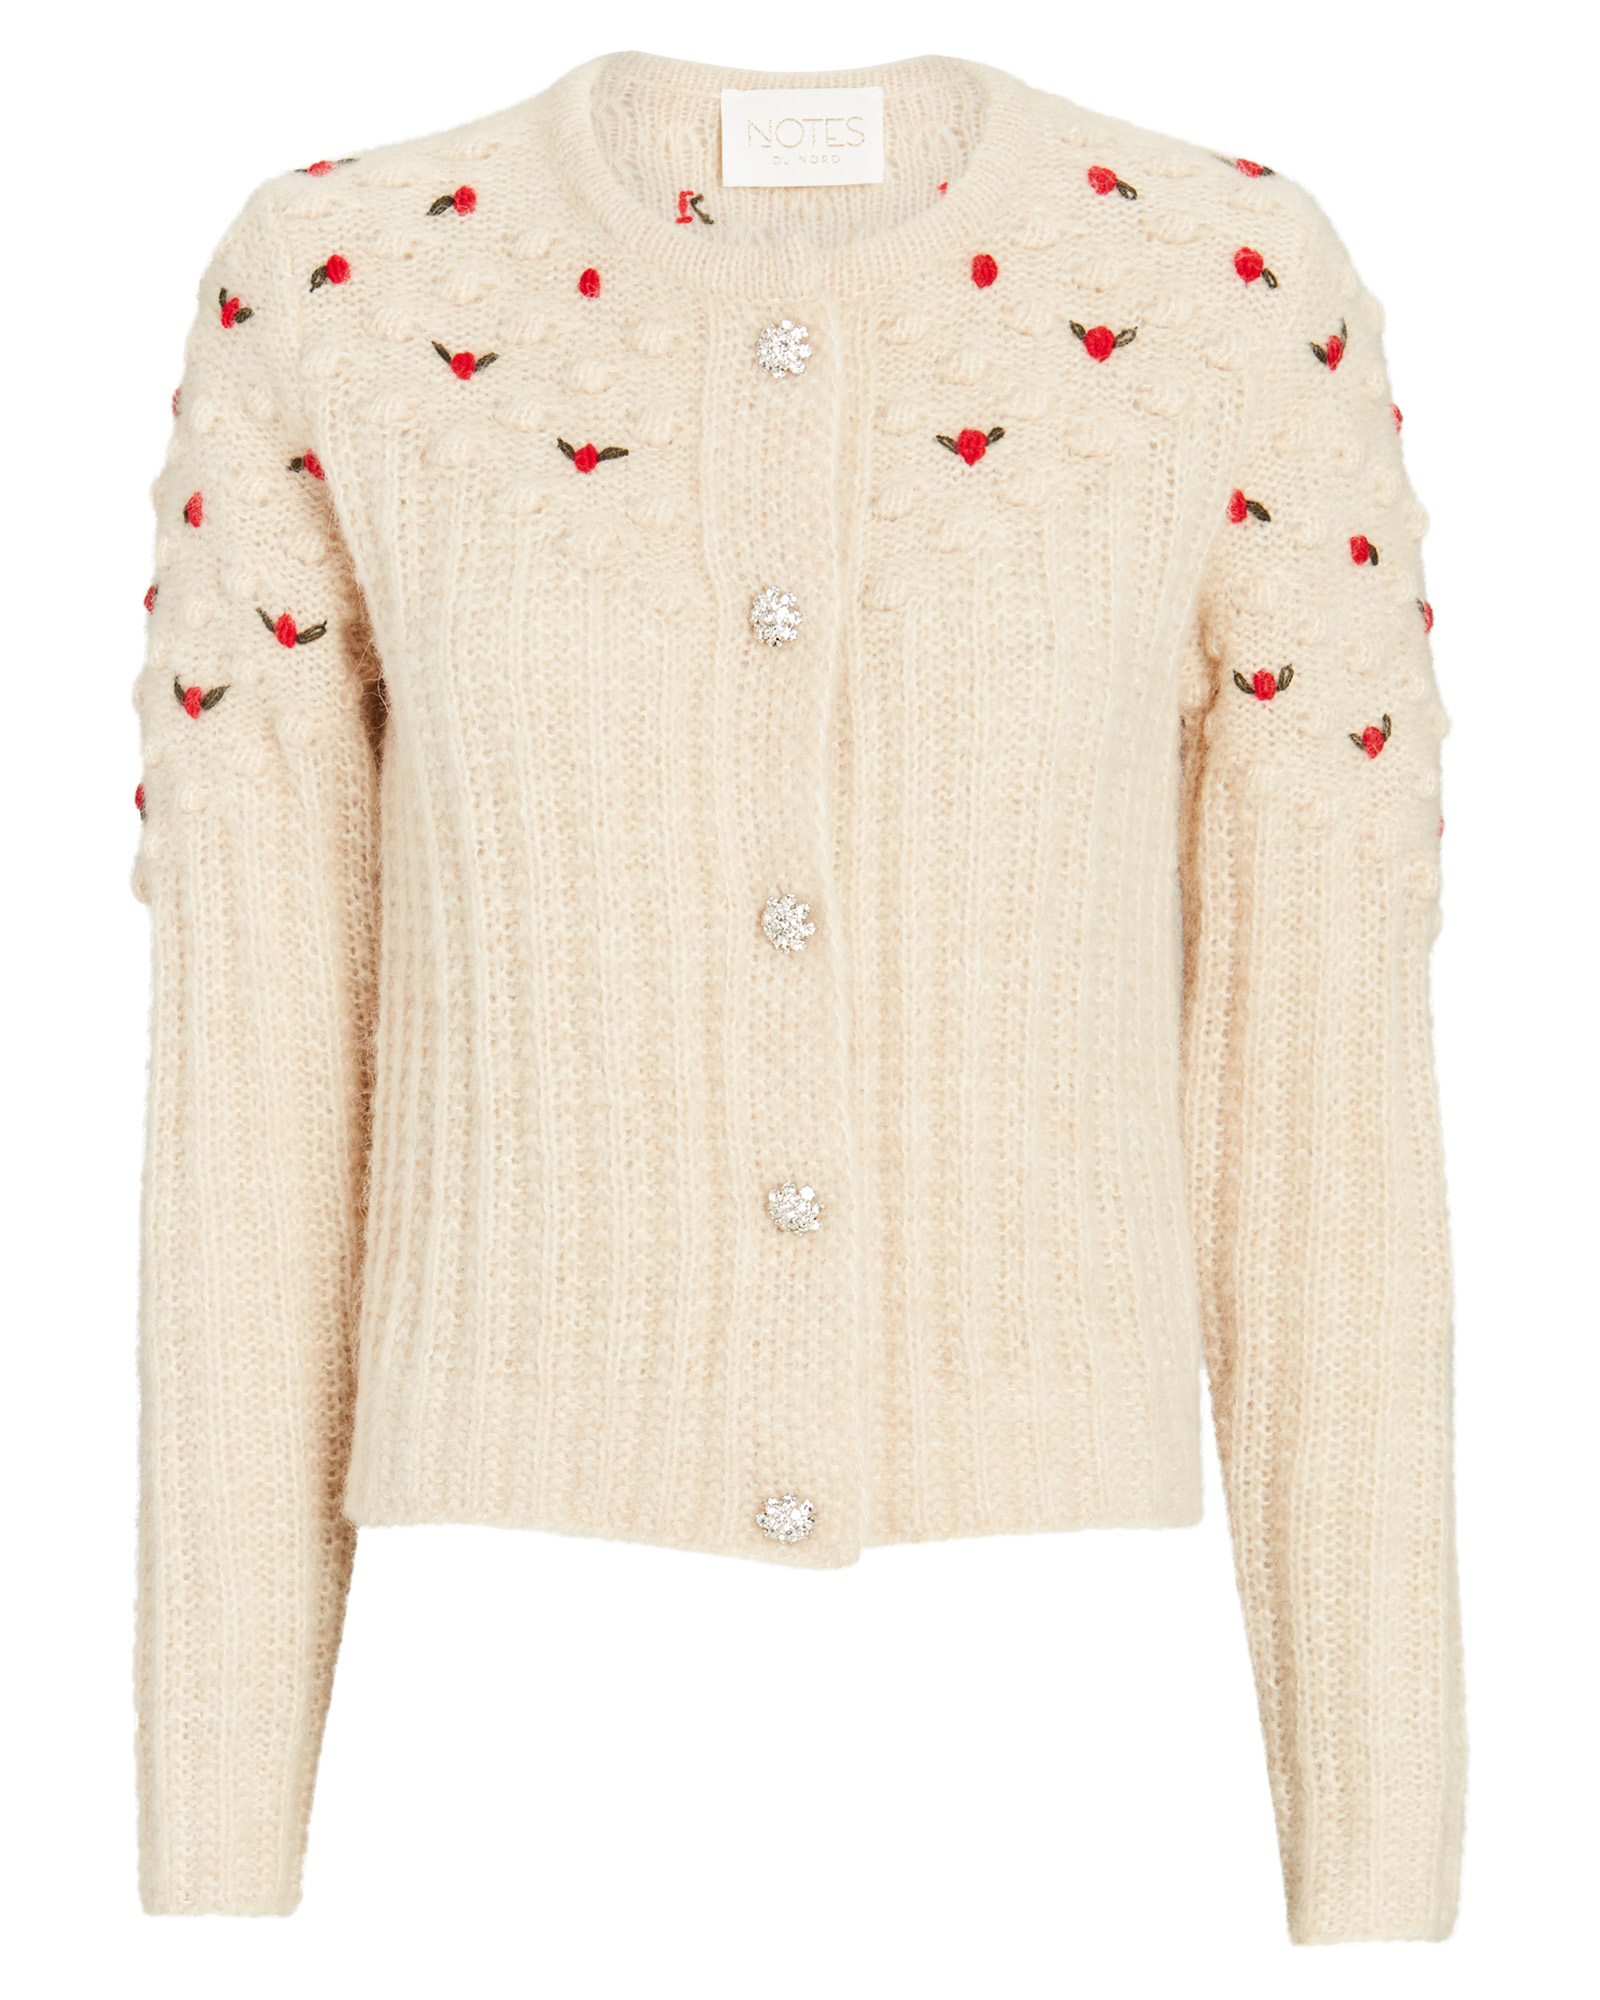 Notes Du Nord Rollo Embroidered Cardigan | INTERMIX®